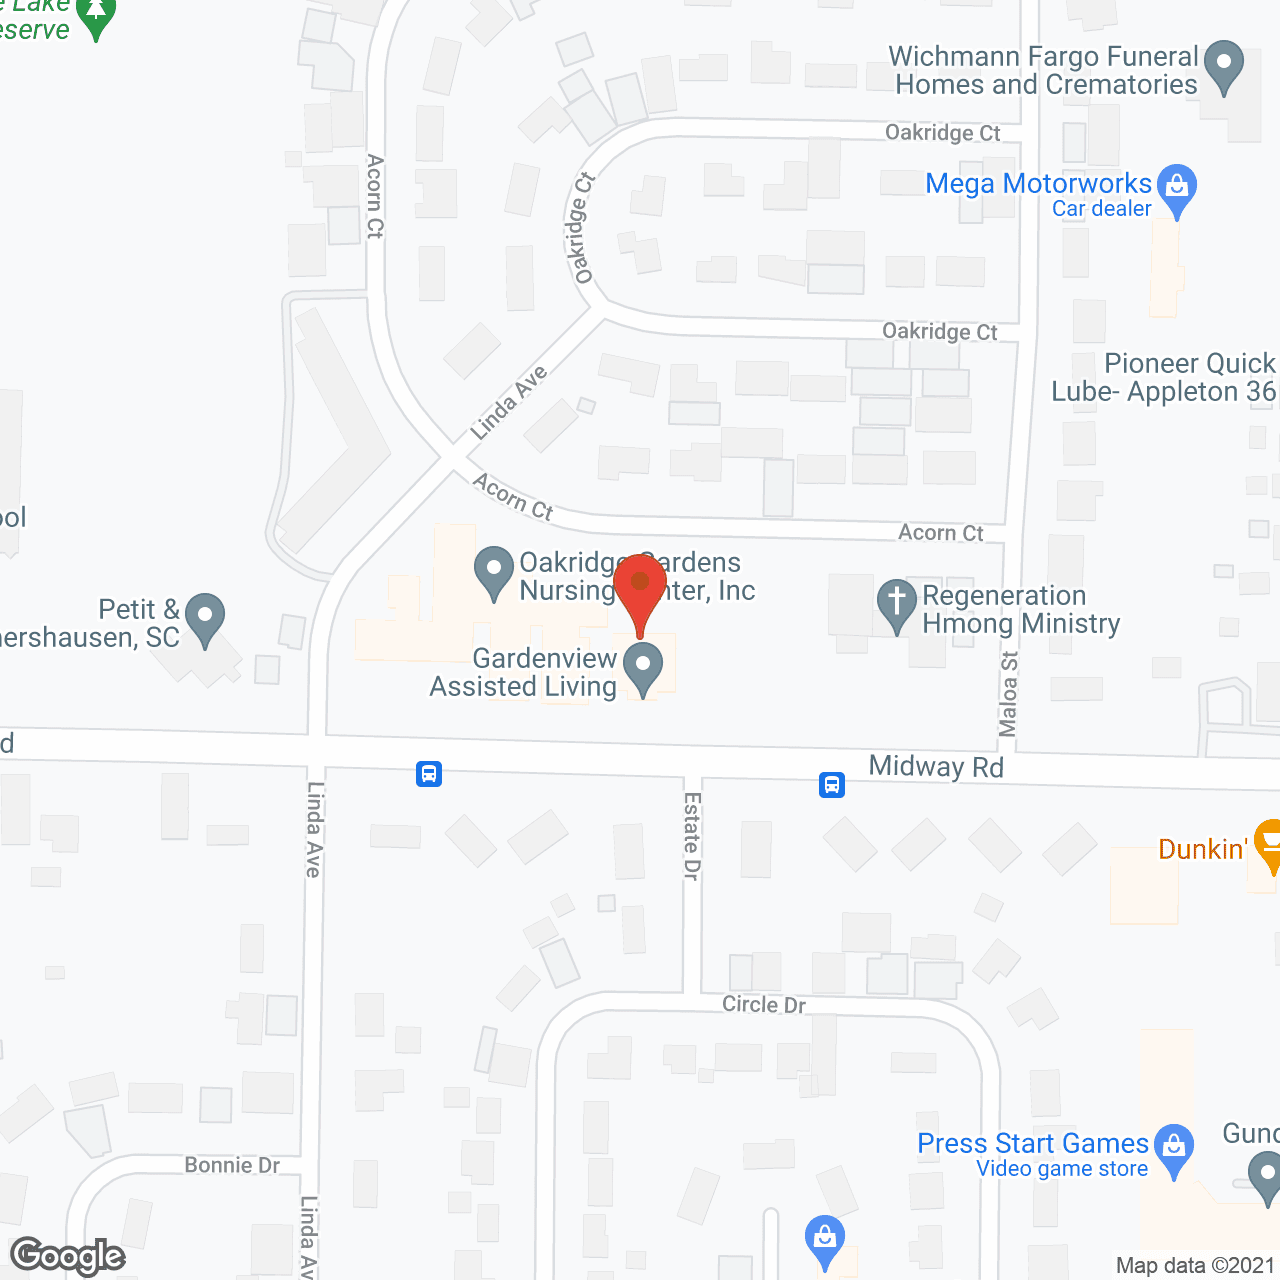 Gardenview Assisted Living in google map